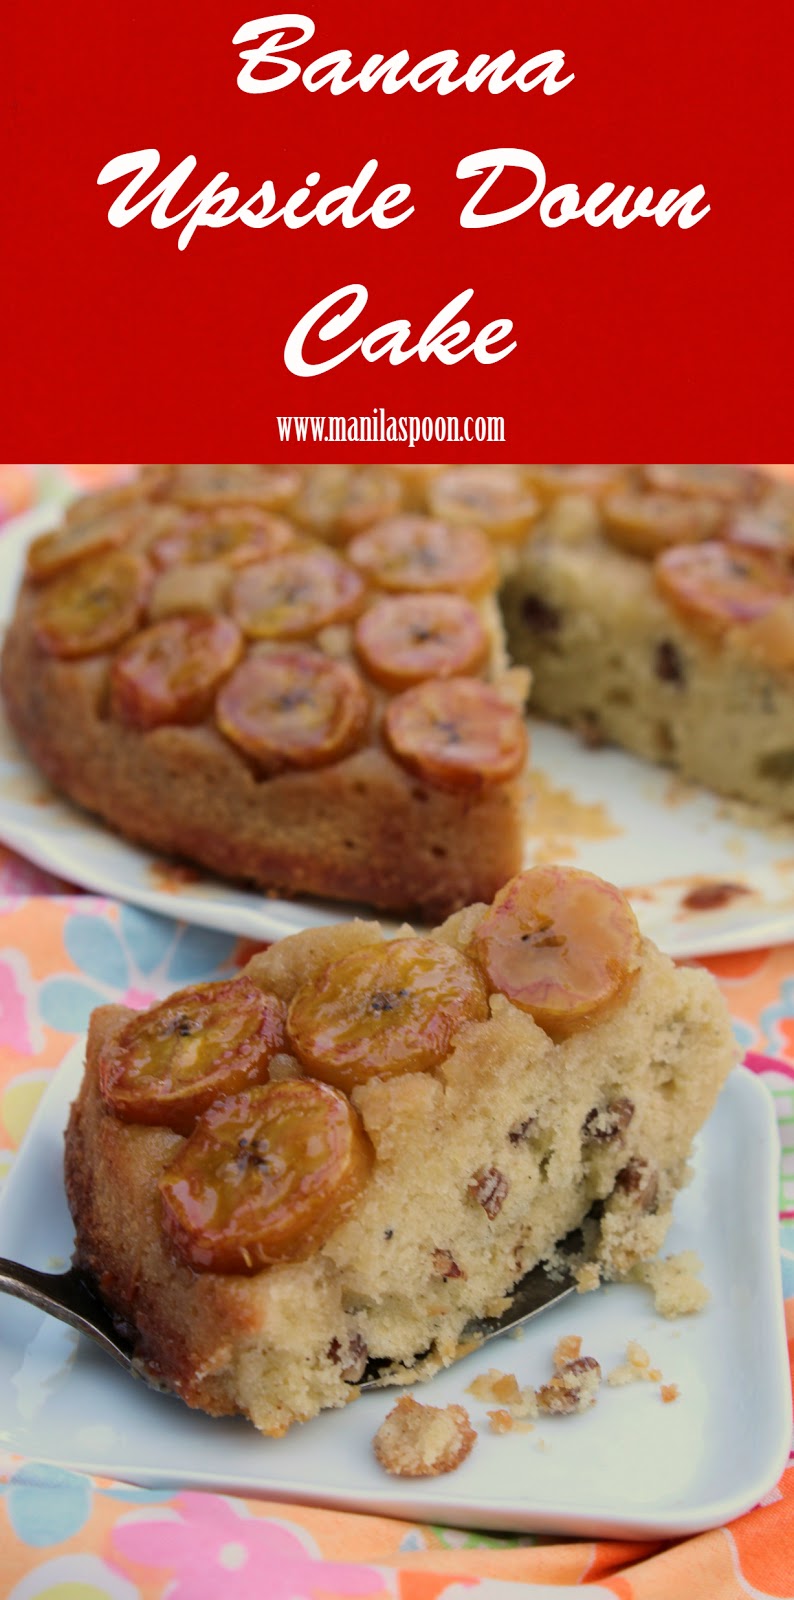 Use sweet ripe bananas or plantains to make this light, super-moist and delicious upside down cake!